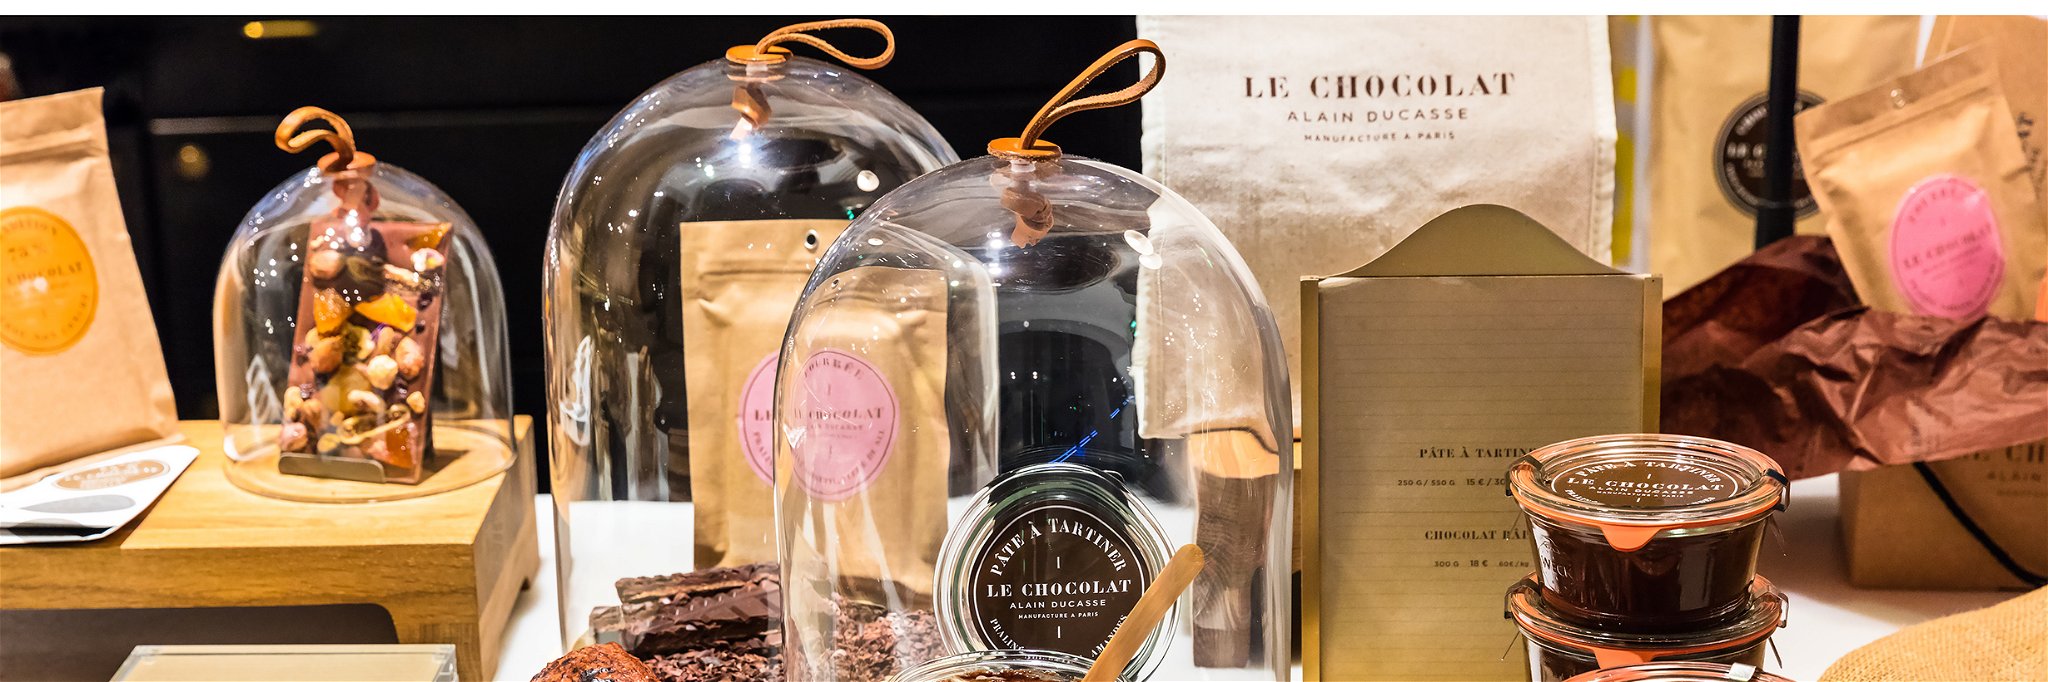 Different kinds of premium chocolate products by Alain Ducasse on display in a French supermarket.